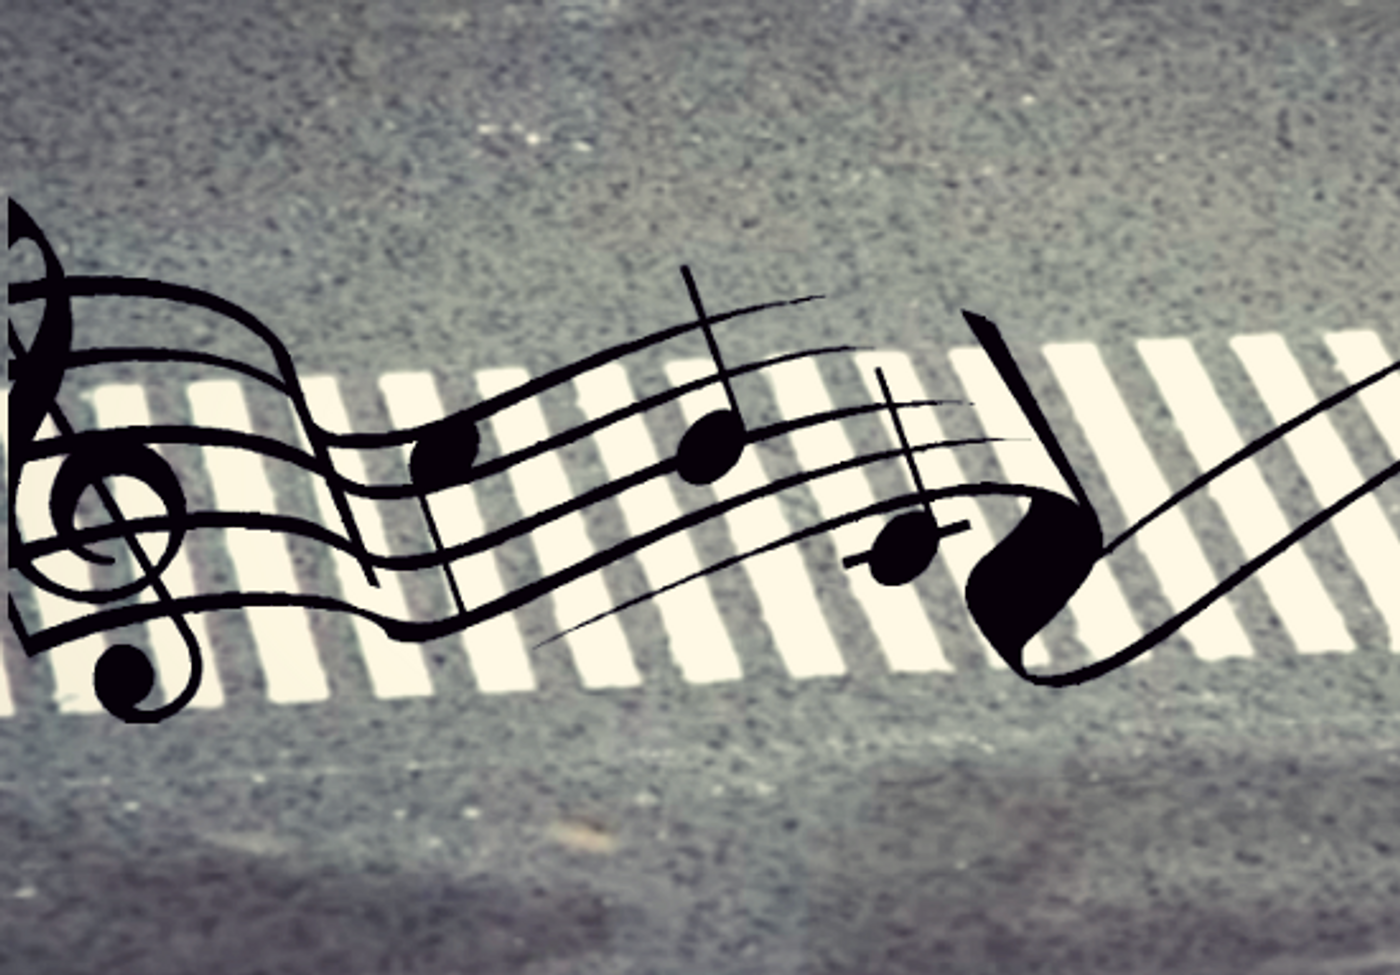 collage of musical notes on road, credit: public domain